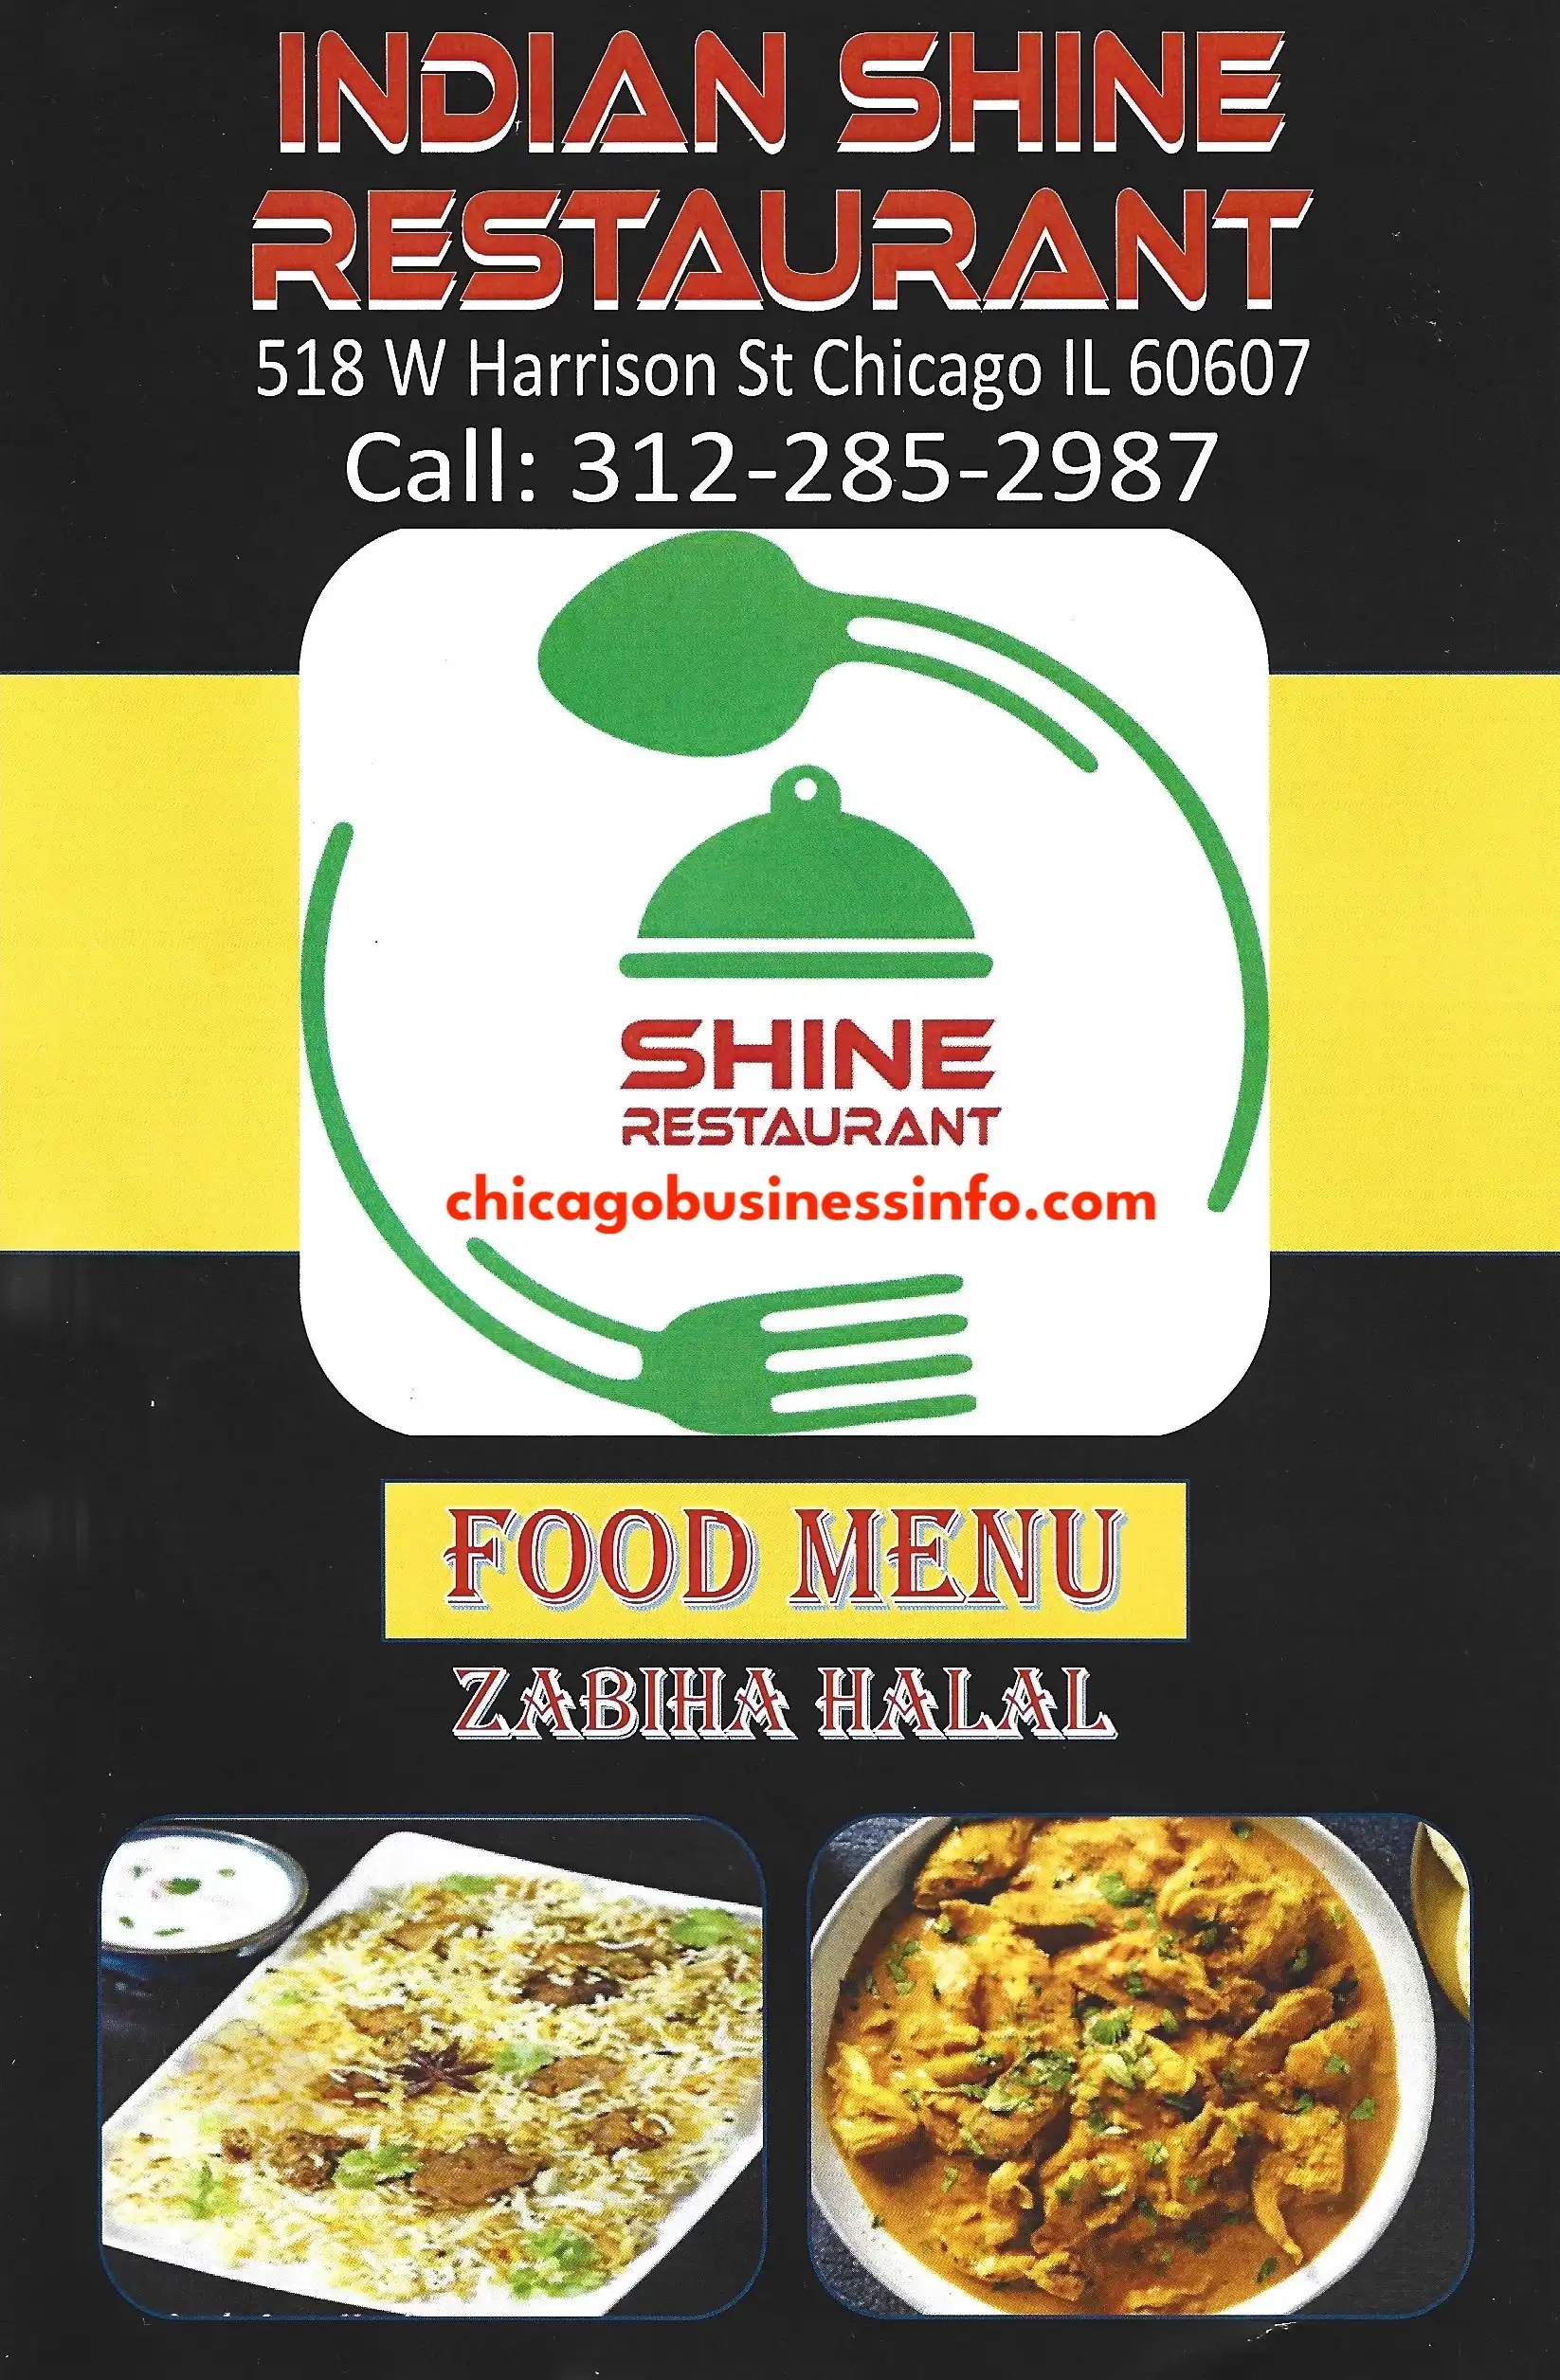 Indian Shine Restaurant Chicago Carry Out Menu 1